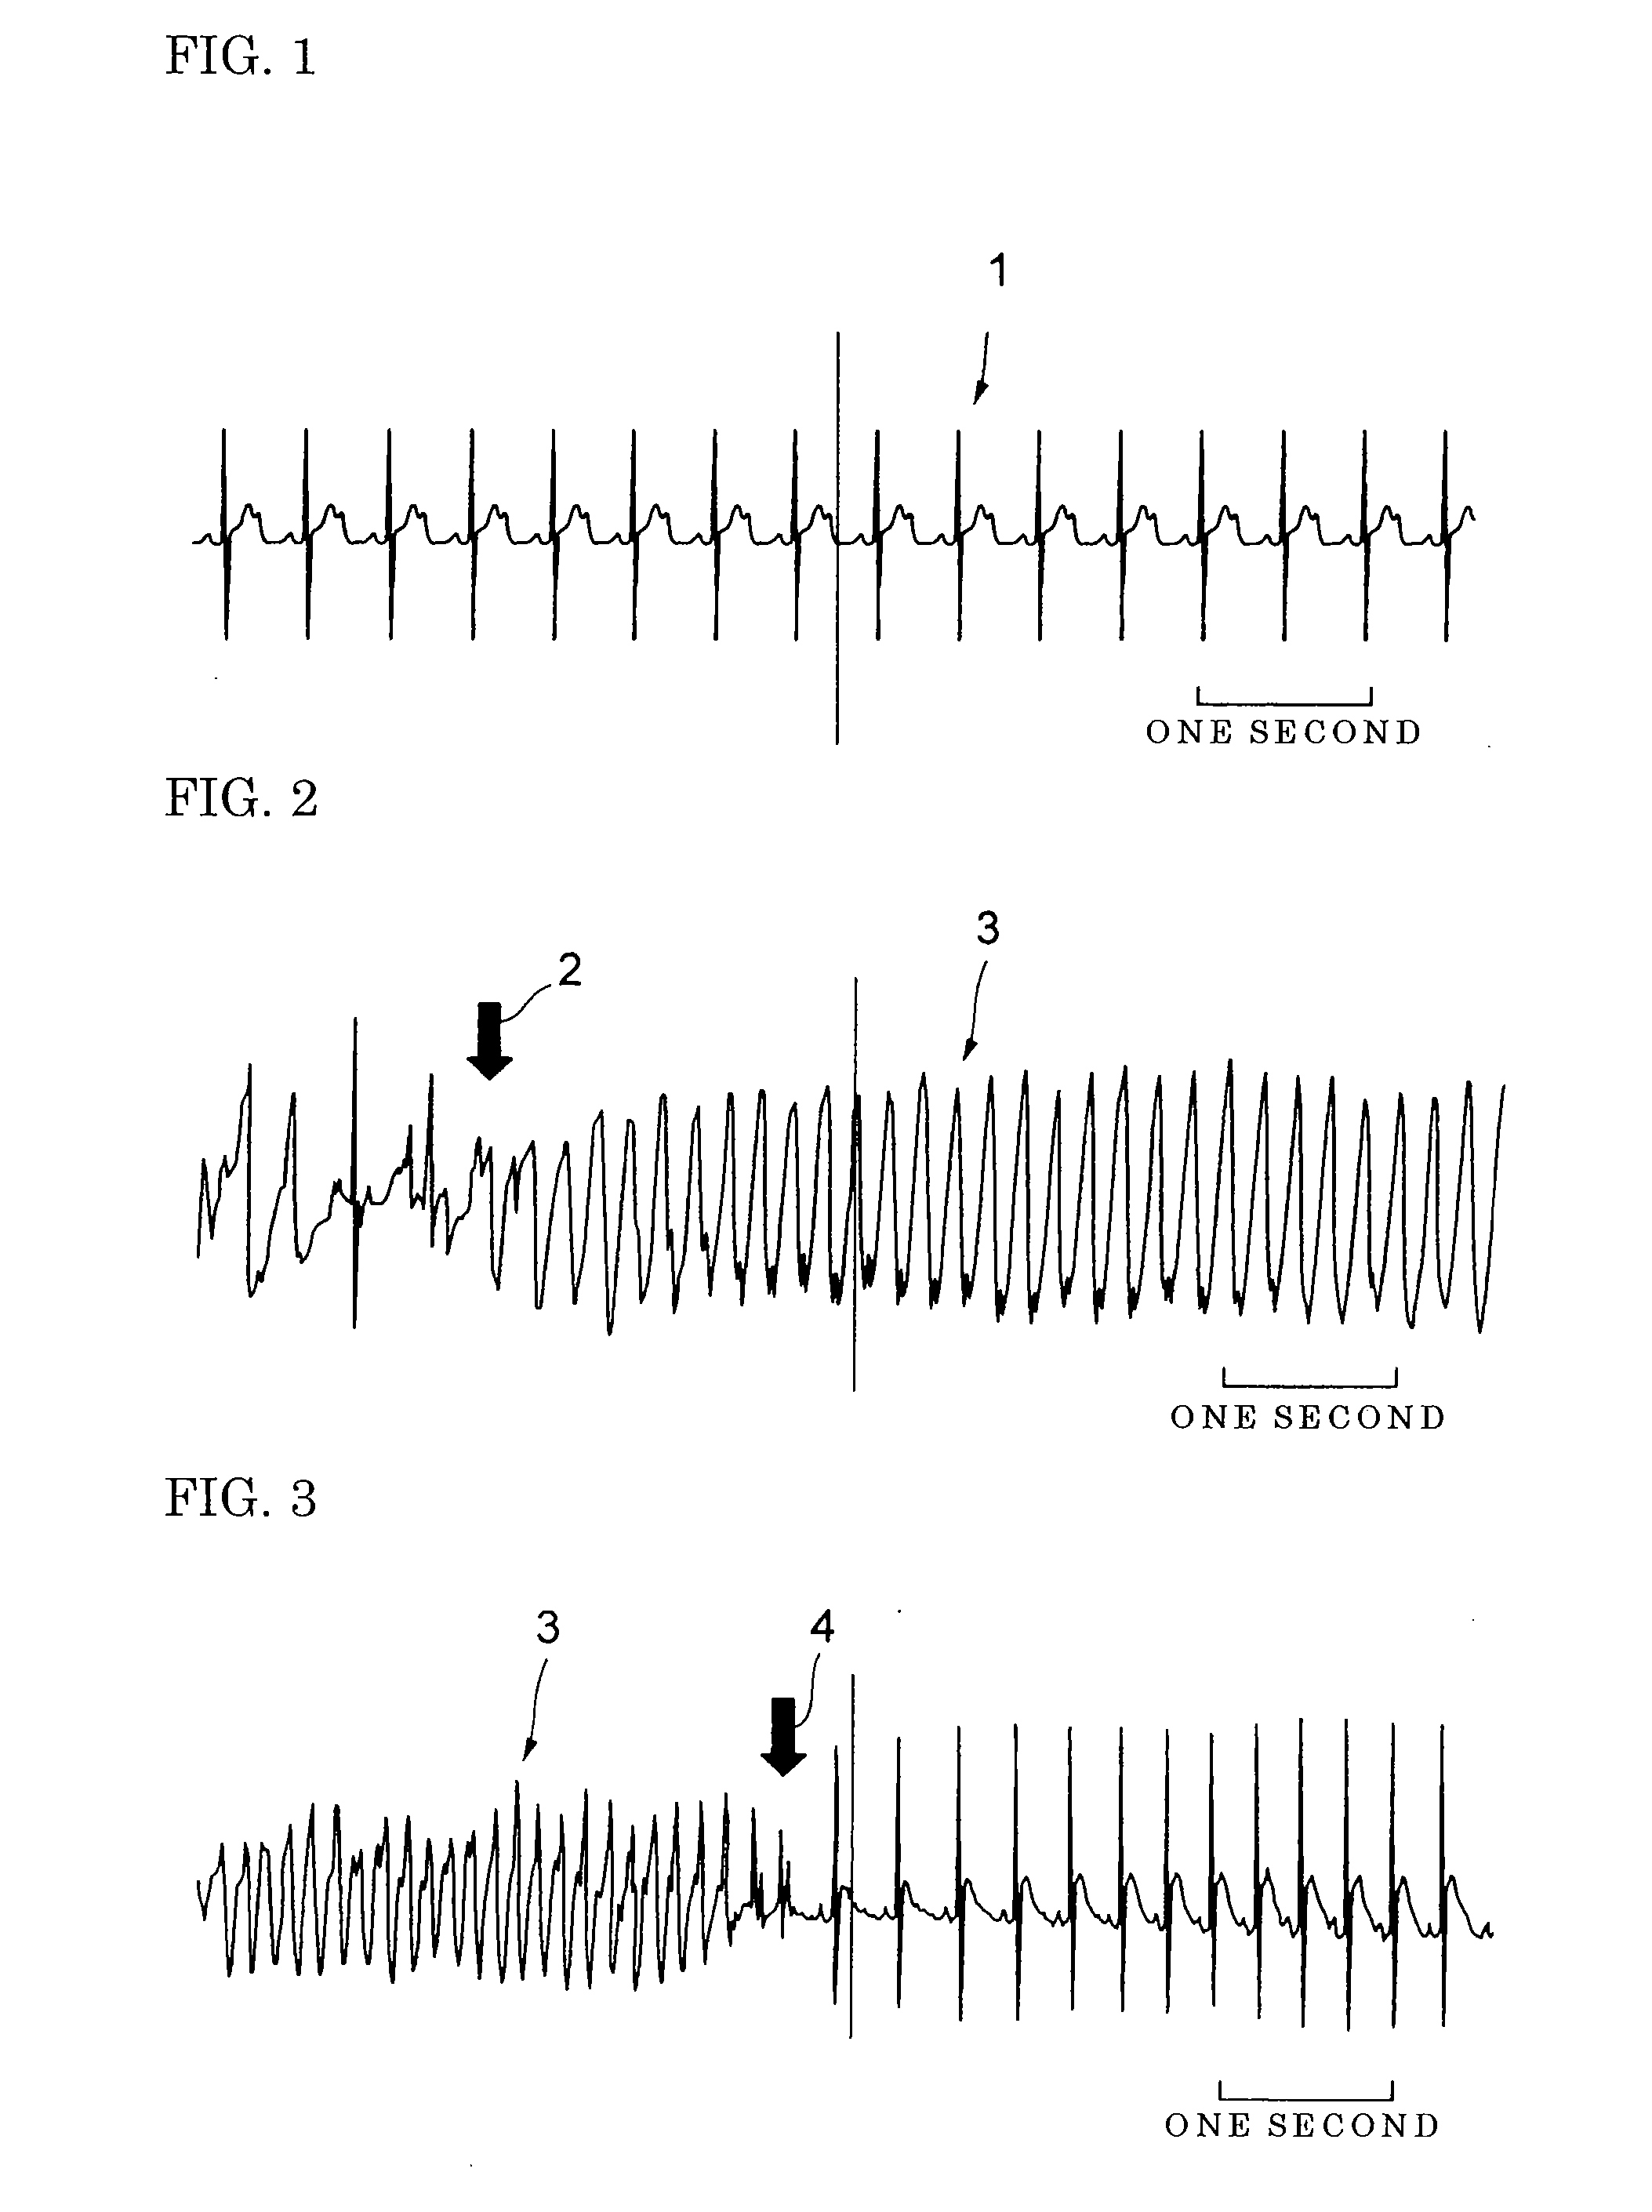 Muscle Relaxtion Accelerator and Therapeutic Agent for Muscular Tissue Diseases Such as Muscle Relaxation Failure